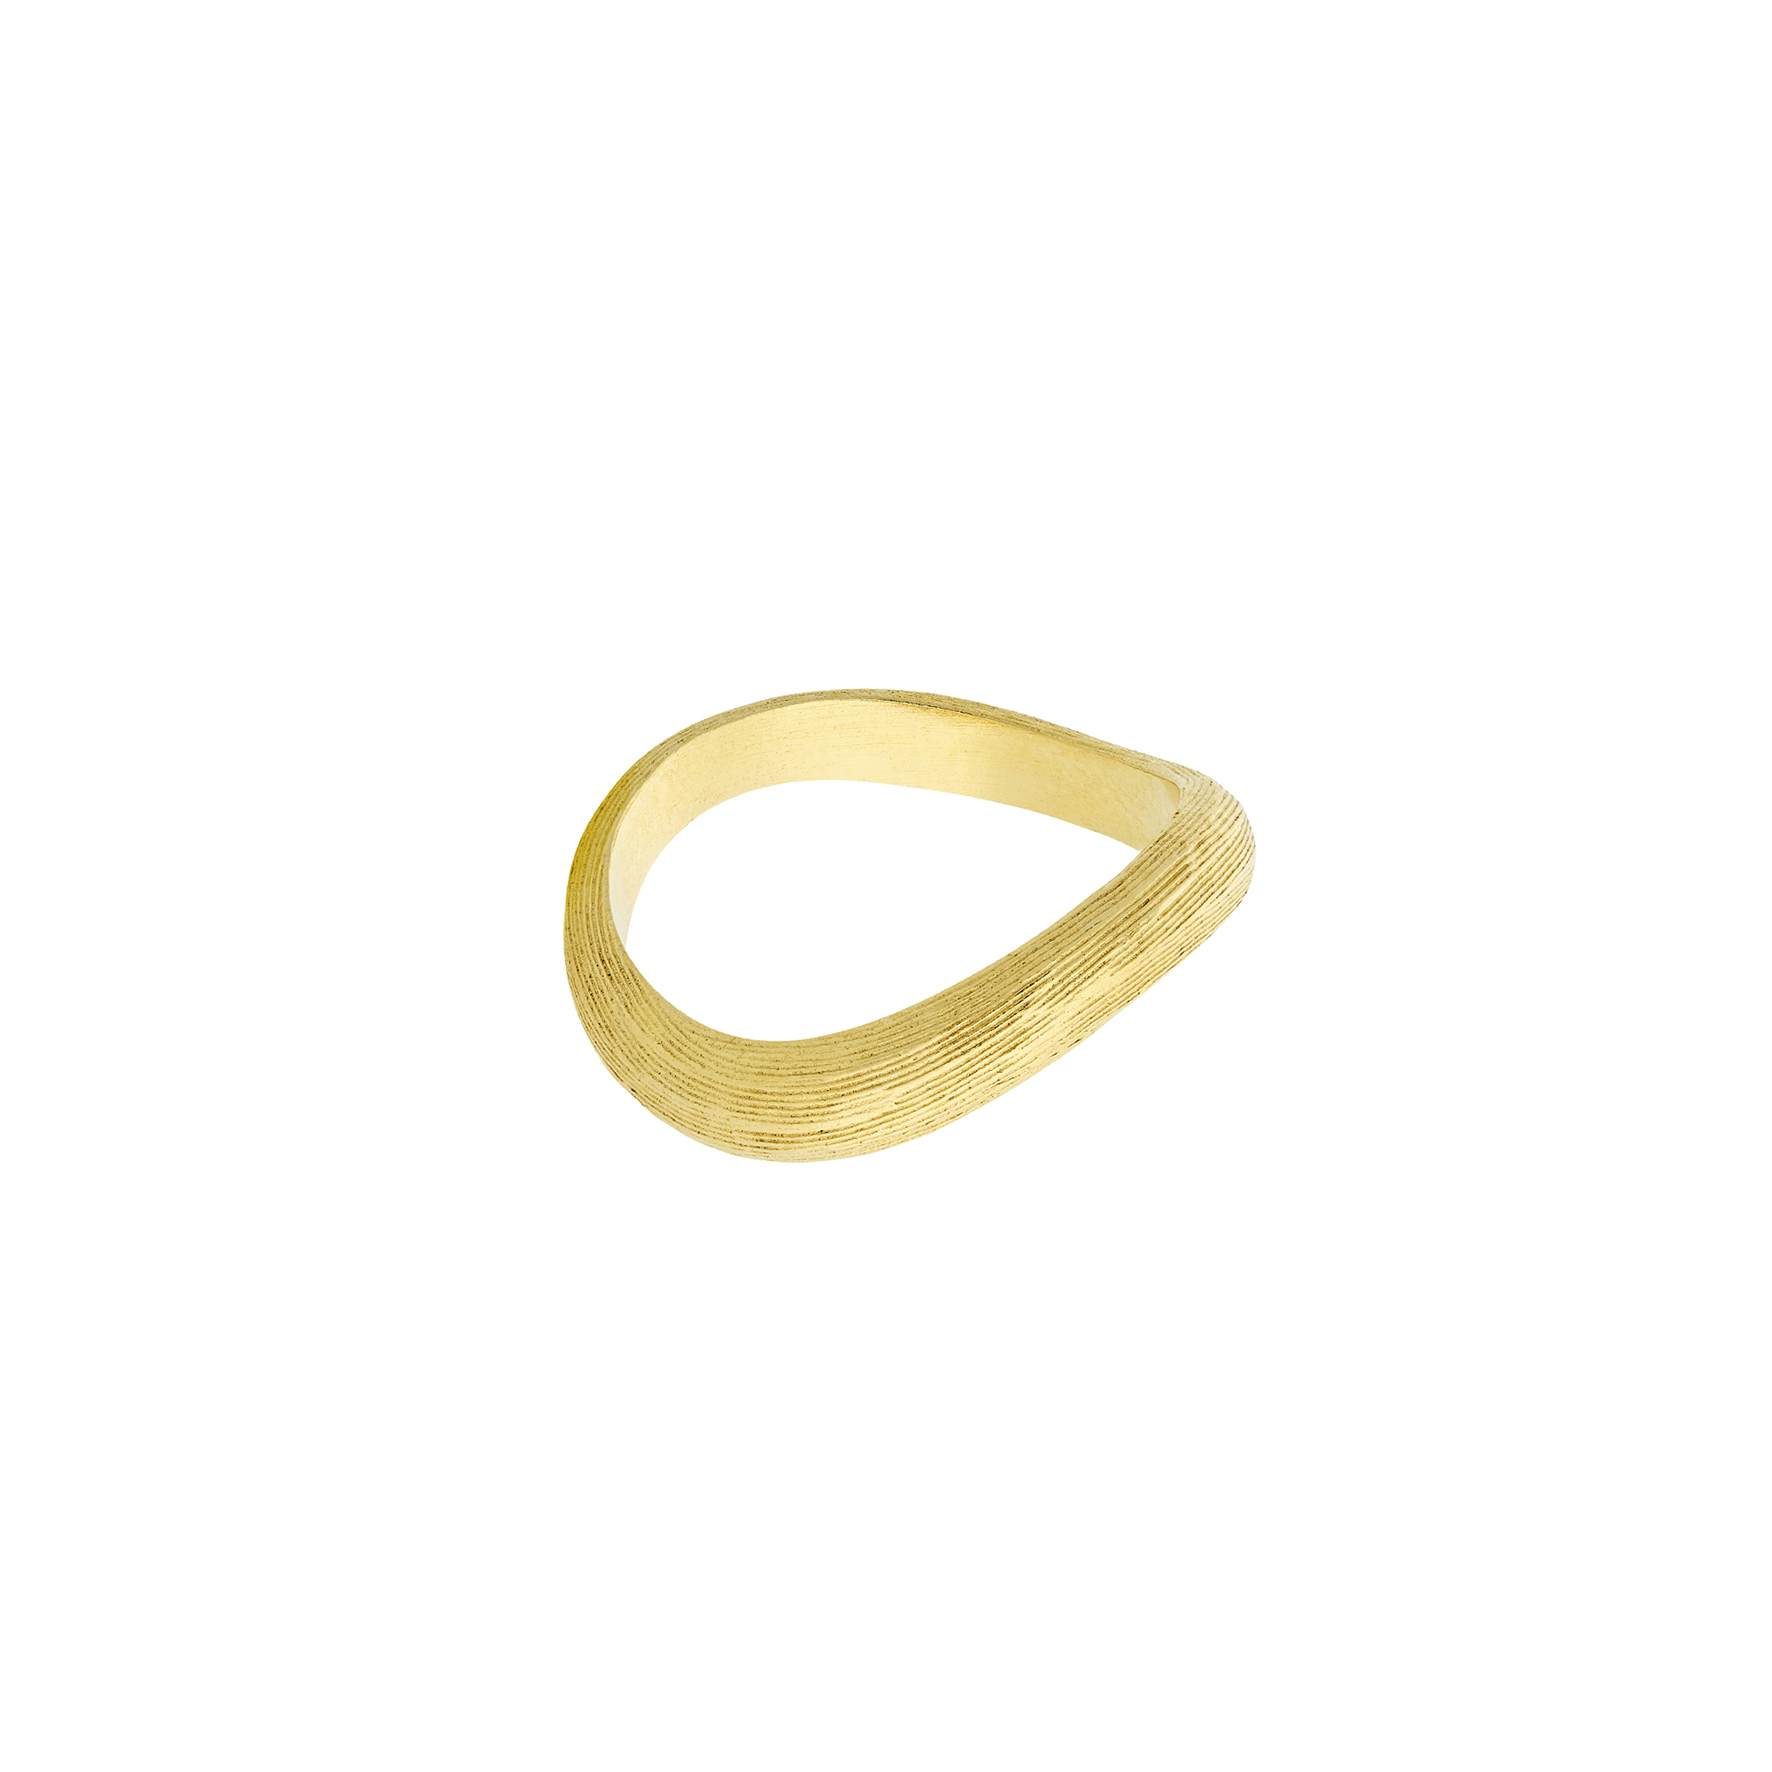 Elva Ring from Pernille Corydon in Goldplated-Silver Sterling 925